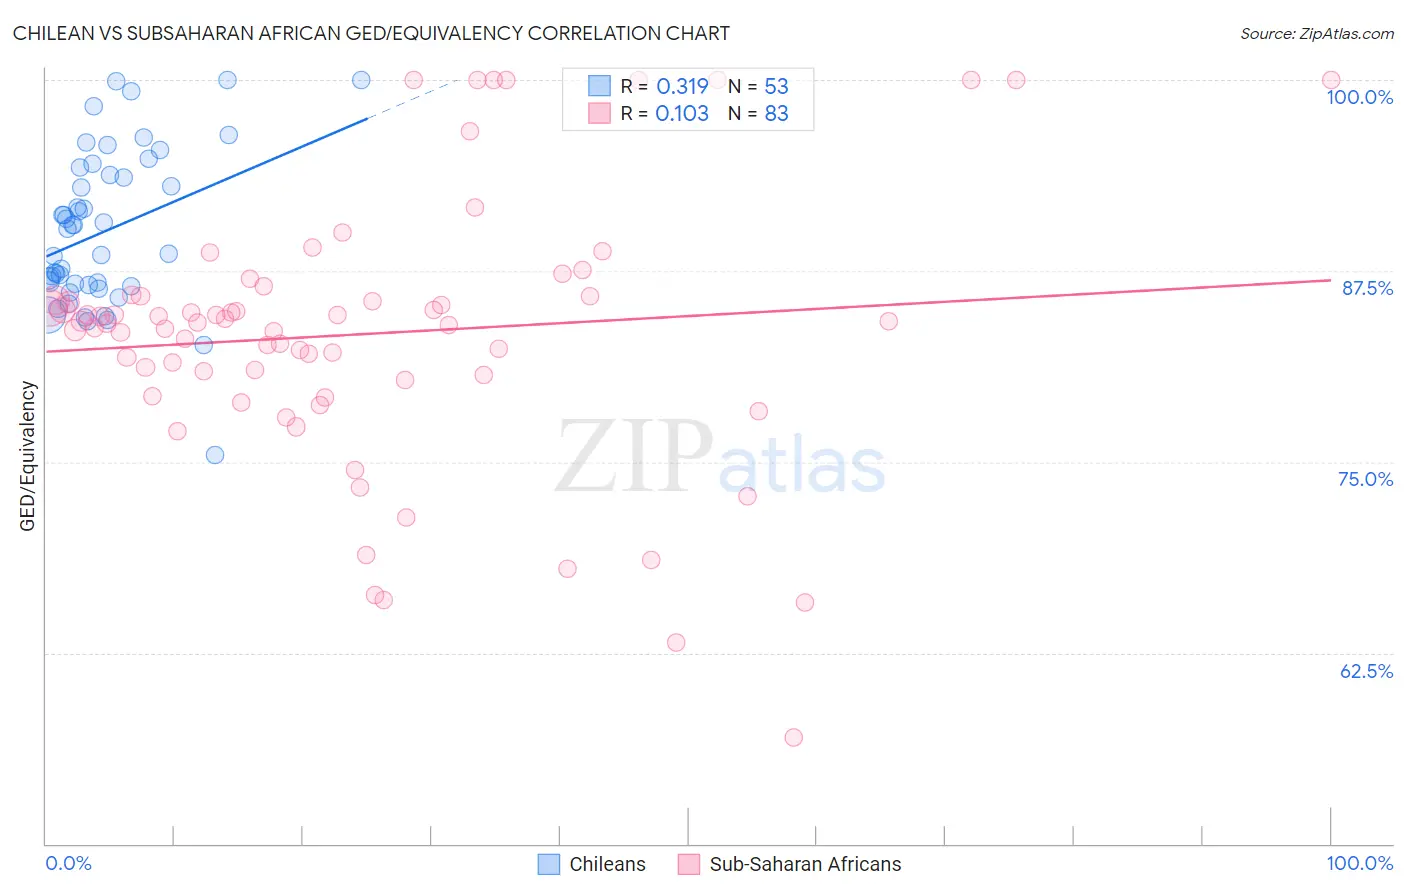 Chilean vs Subsaharan African GED/Equivalency